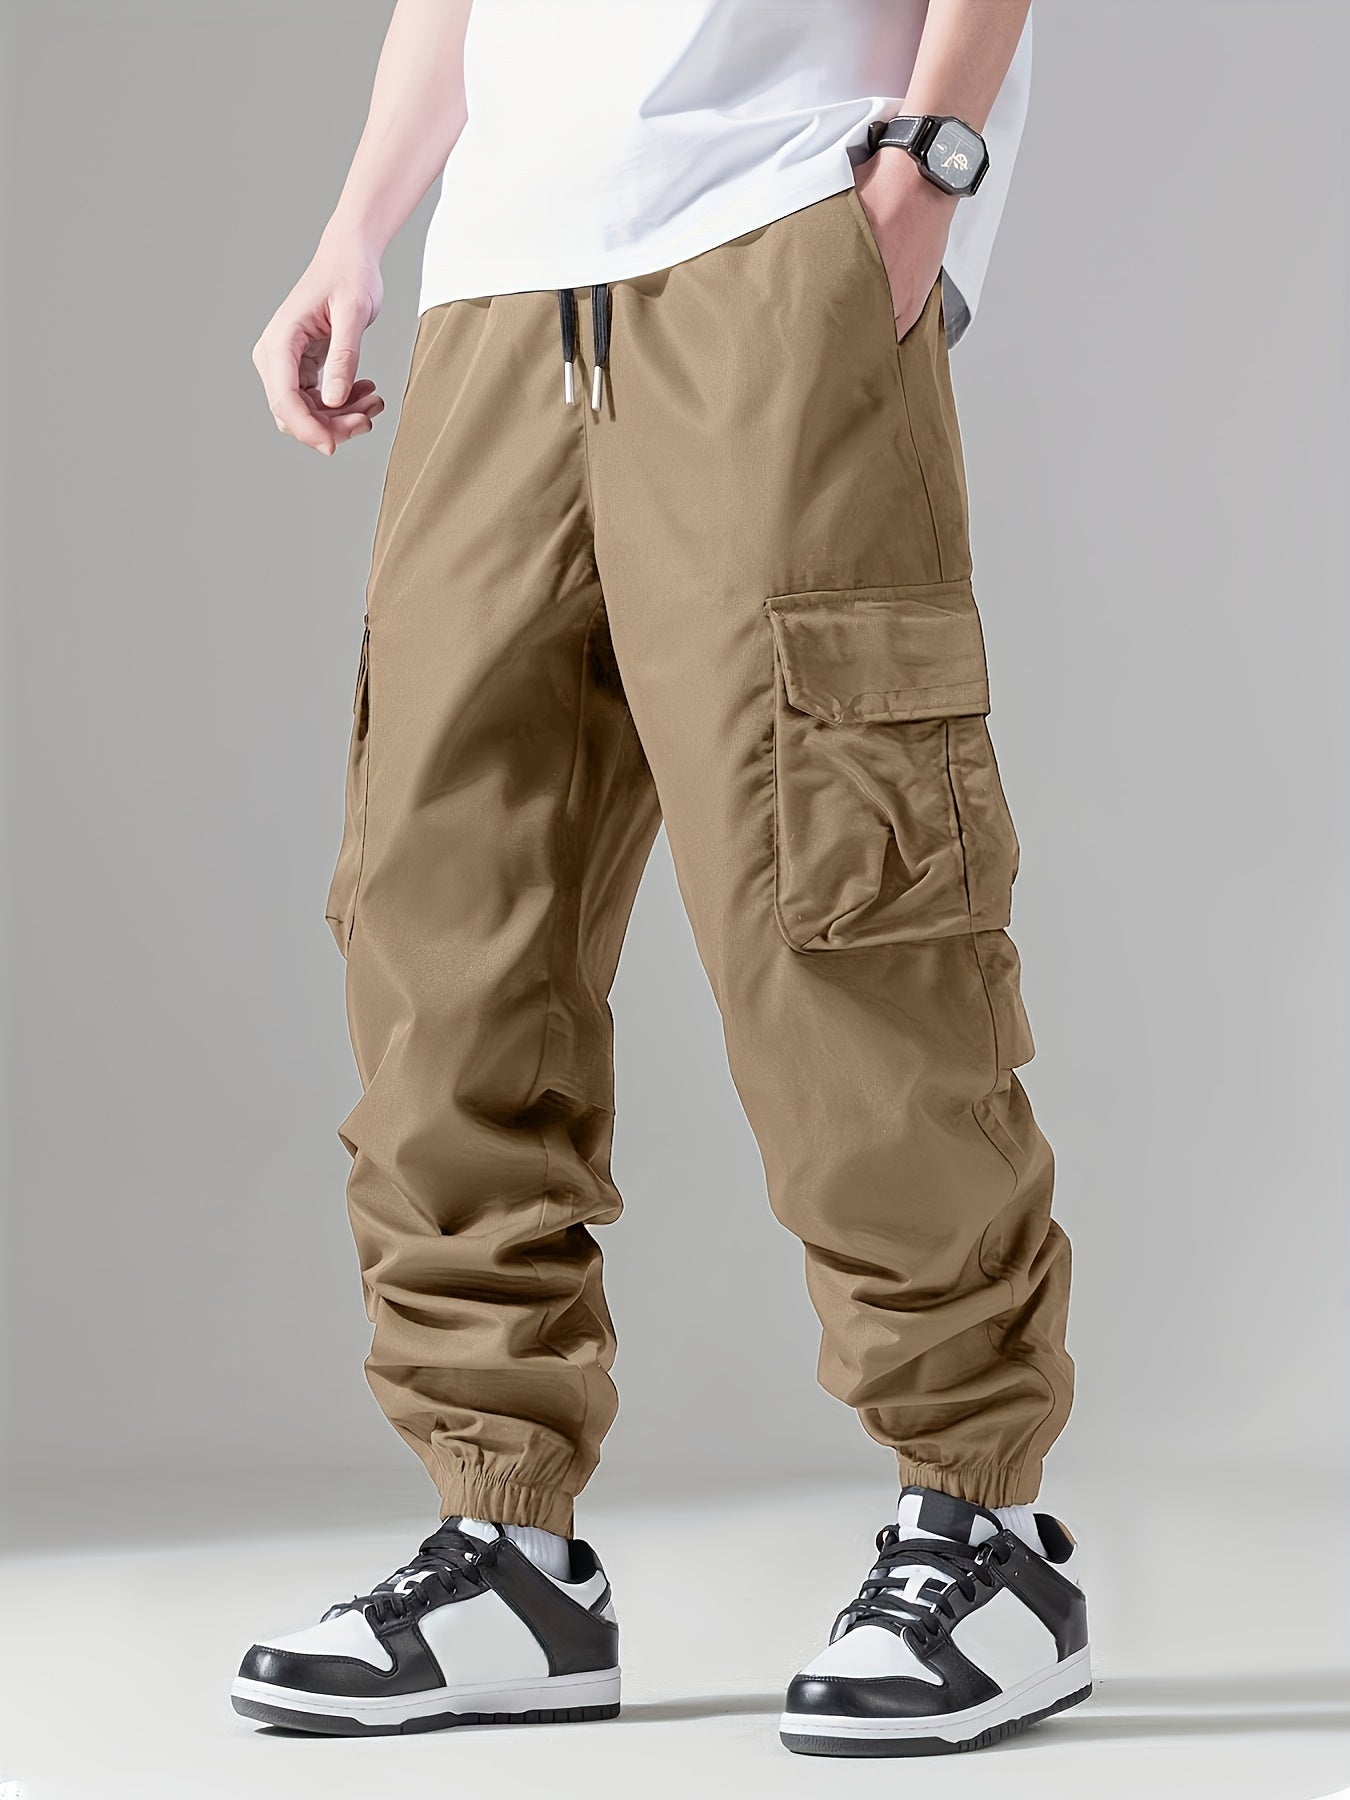 Boys Solid Cargo Pants - Durable & Stylish with Multiple Pockets - Perfect Outdoor Gift for Daily Adventures - Comfort Fit, Unisex Design - Ammpoure Wellbeing